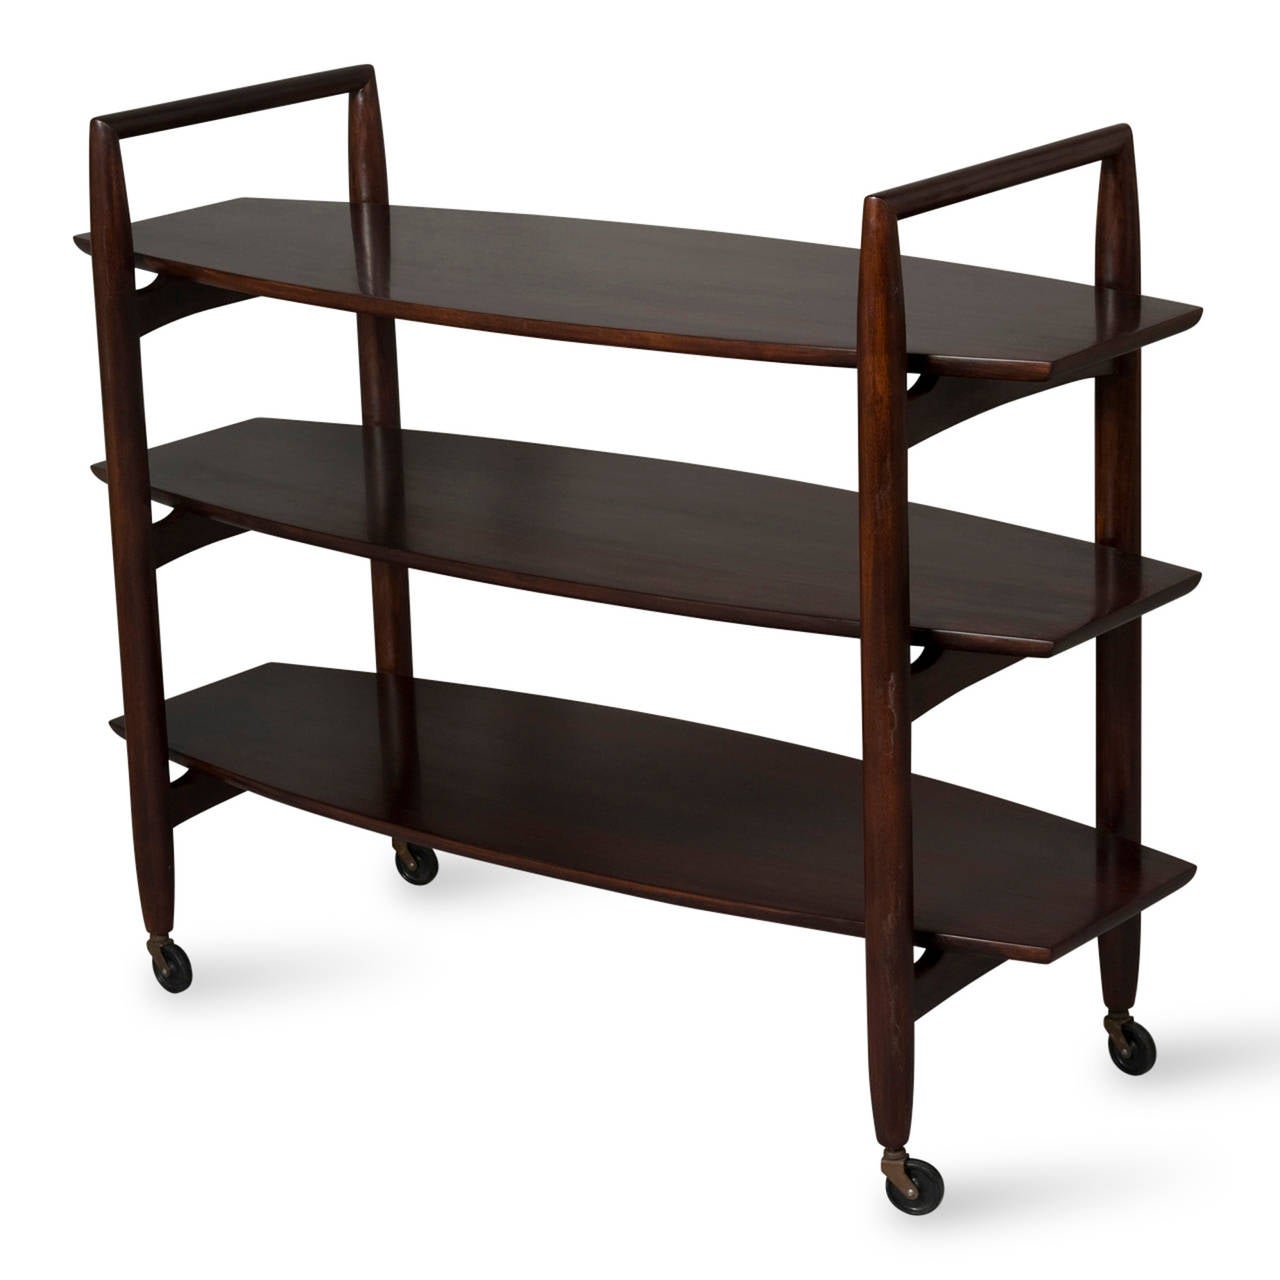 Three tier mahogany rolling shelf, slightly oval shaped shelves, inverted U shaped supports, by T.H. Robsjohn-Gibbings for Widdicomb, American 1950s. Length 46 in, depth 16 in, height to top shelf 30 in, height to top of arm 35 1/2 in. (Item #2132)